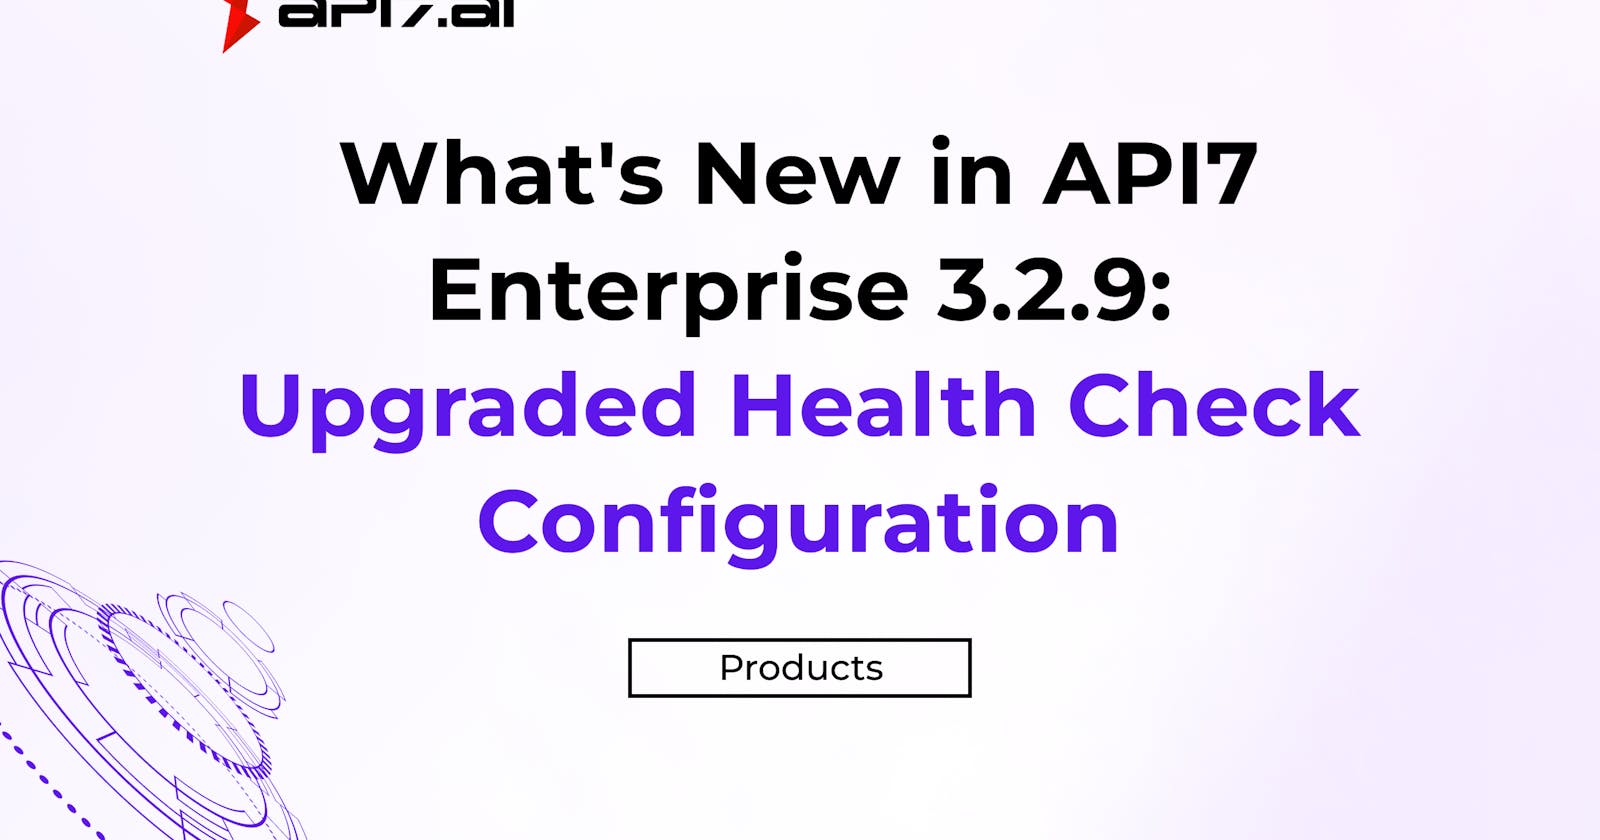 What's New in API7 Enterprise 3.2.9: Upgraded Health Check Configuration